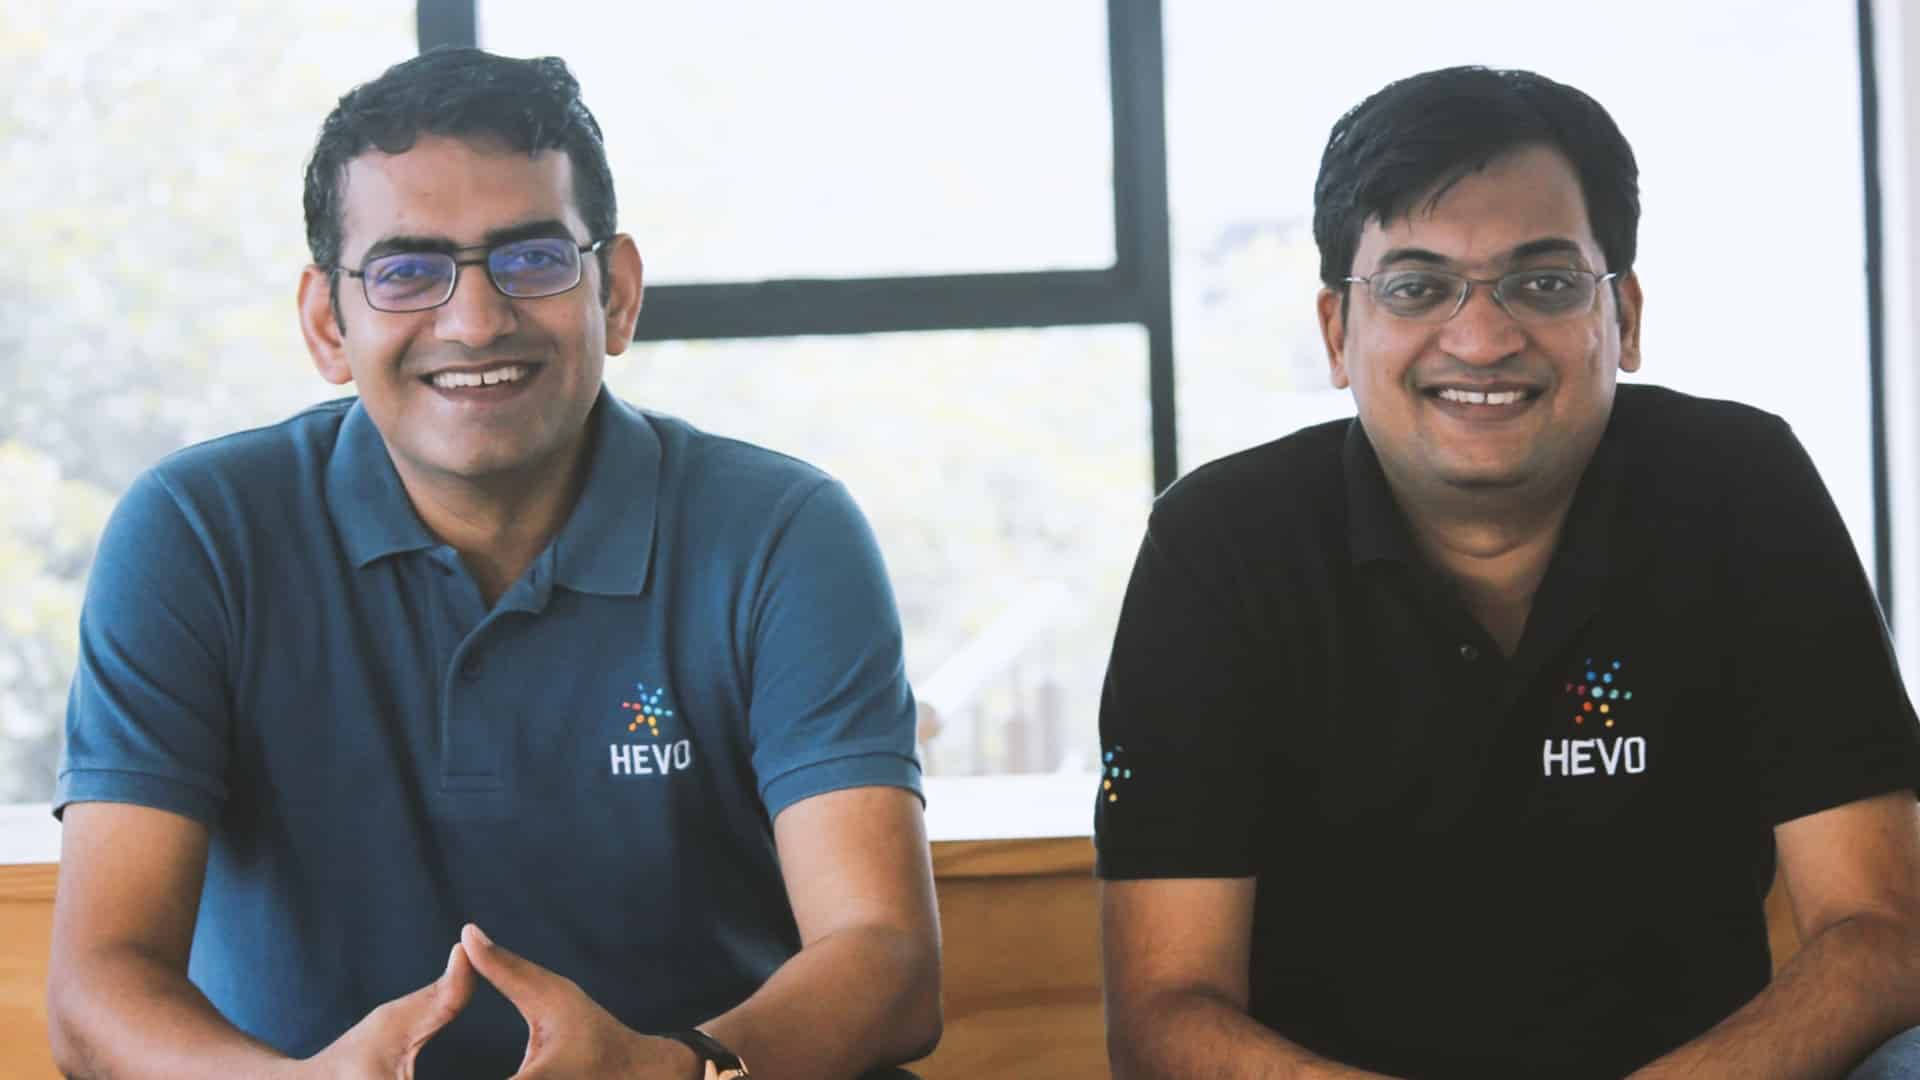 Hevo raises $30 million in funding from Sequoia Capital India, others